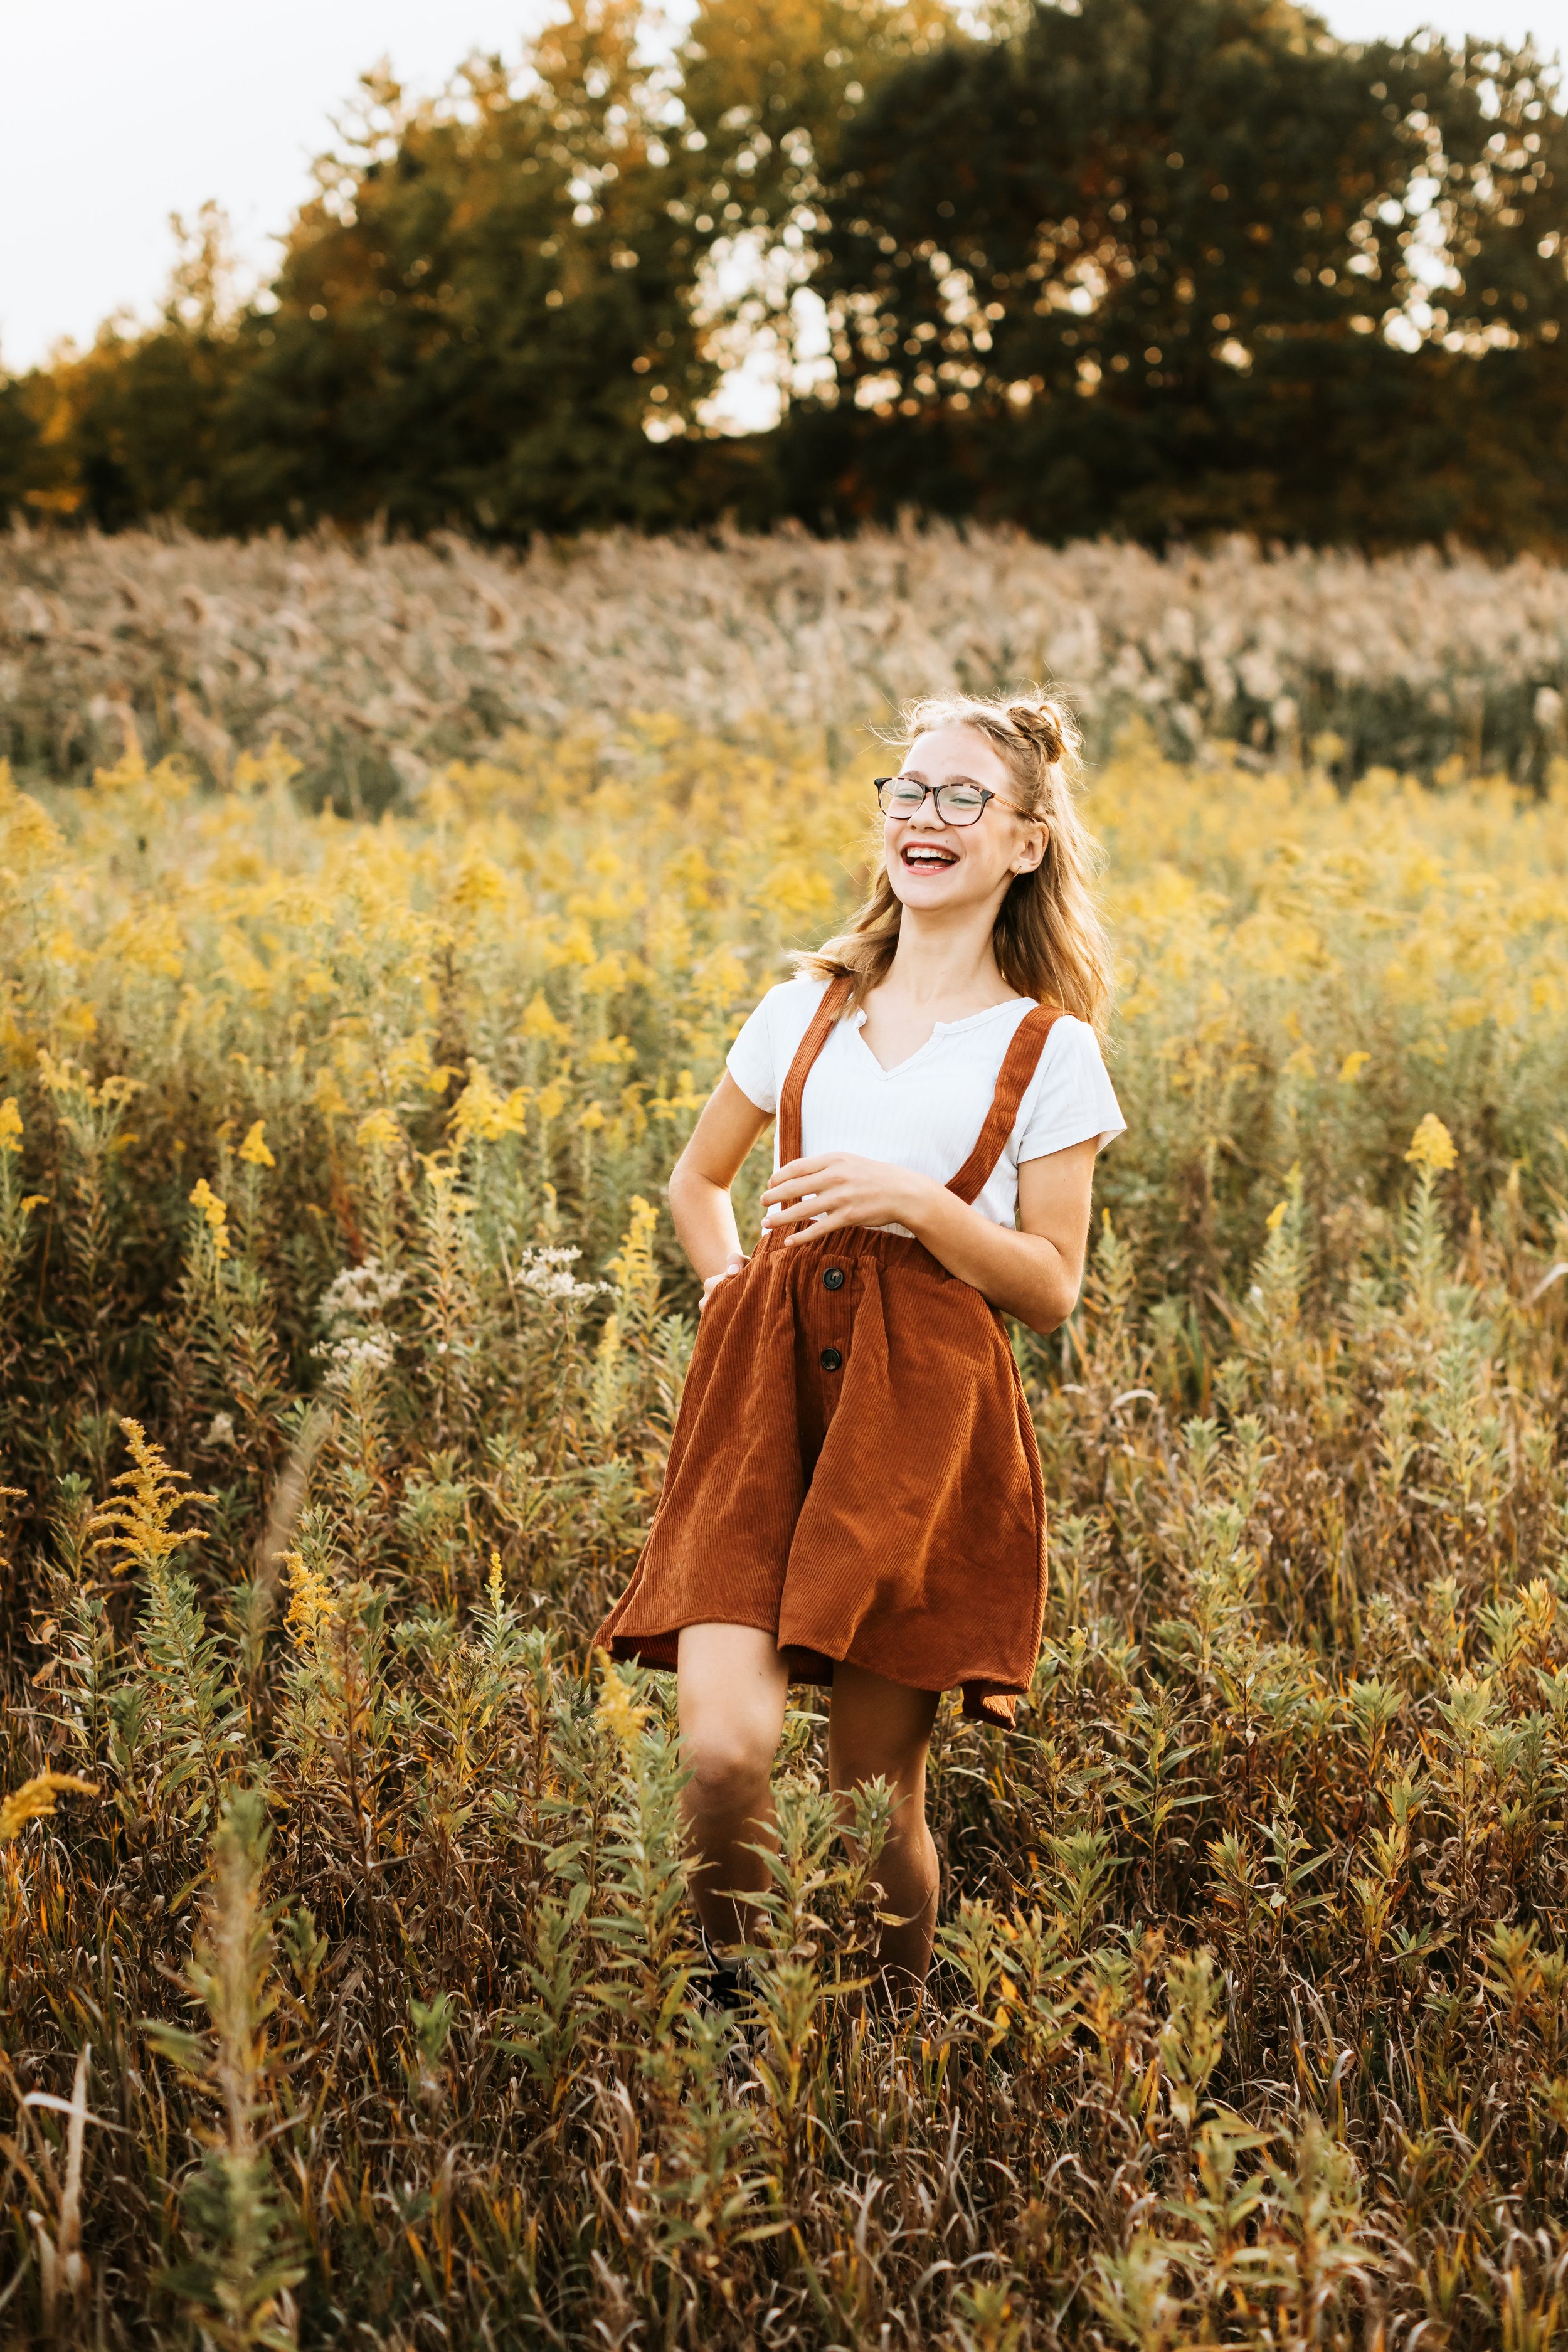  Teala Ward Photography captures a girl laughing in a yellow grass field wearing glasses and a jumper. Illinois Valley photog #TealaWardPhotography #TealaWardFamilies #IllinoisValleyfamilypics #fursibiling #Illinoisfamilyphotography #brother&amp;sist